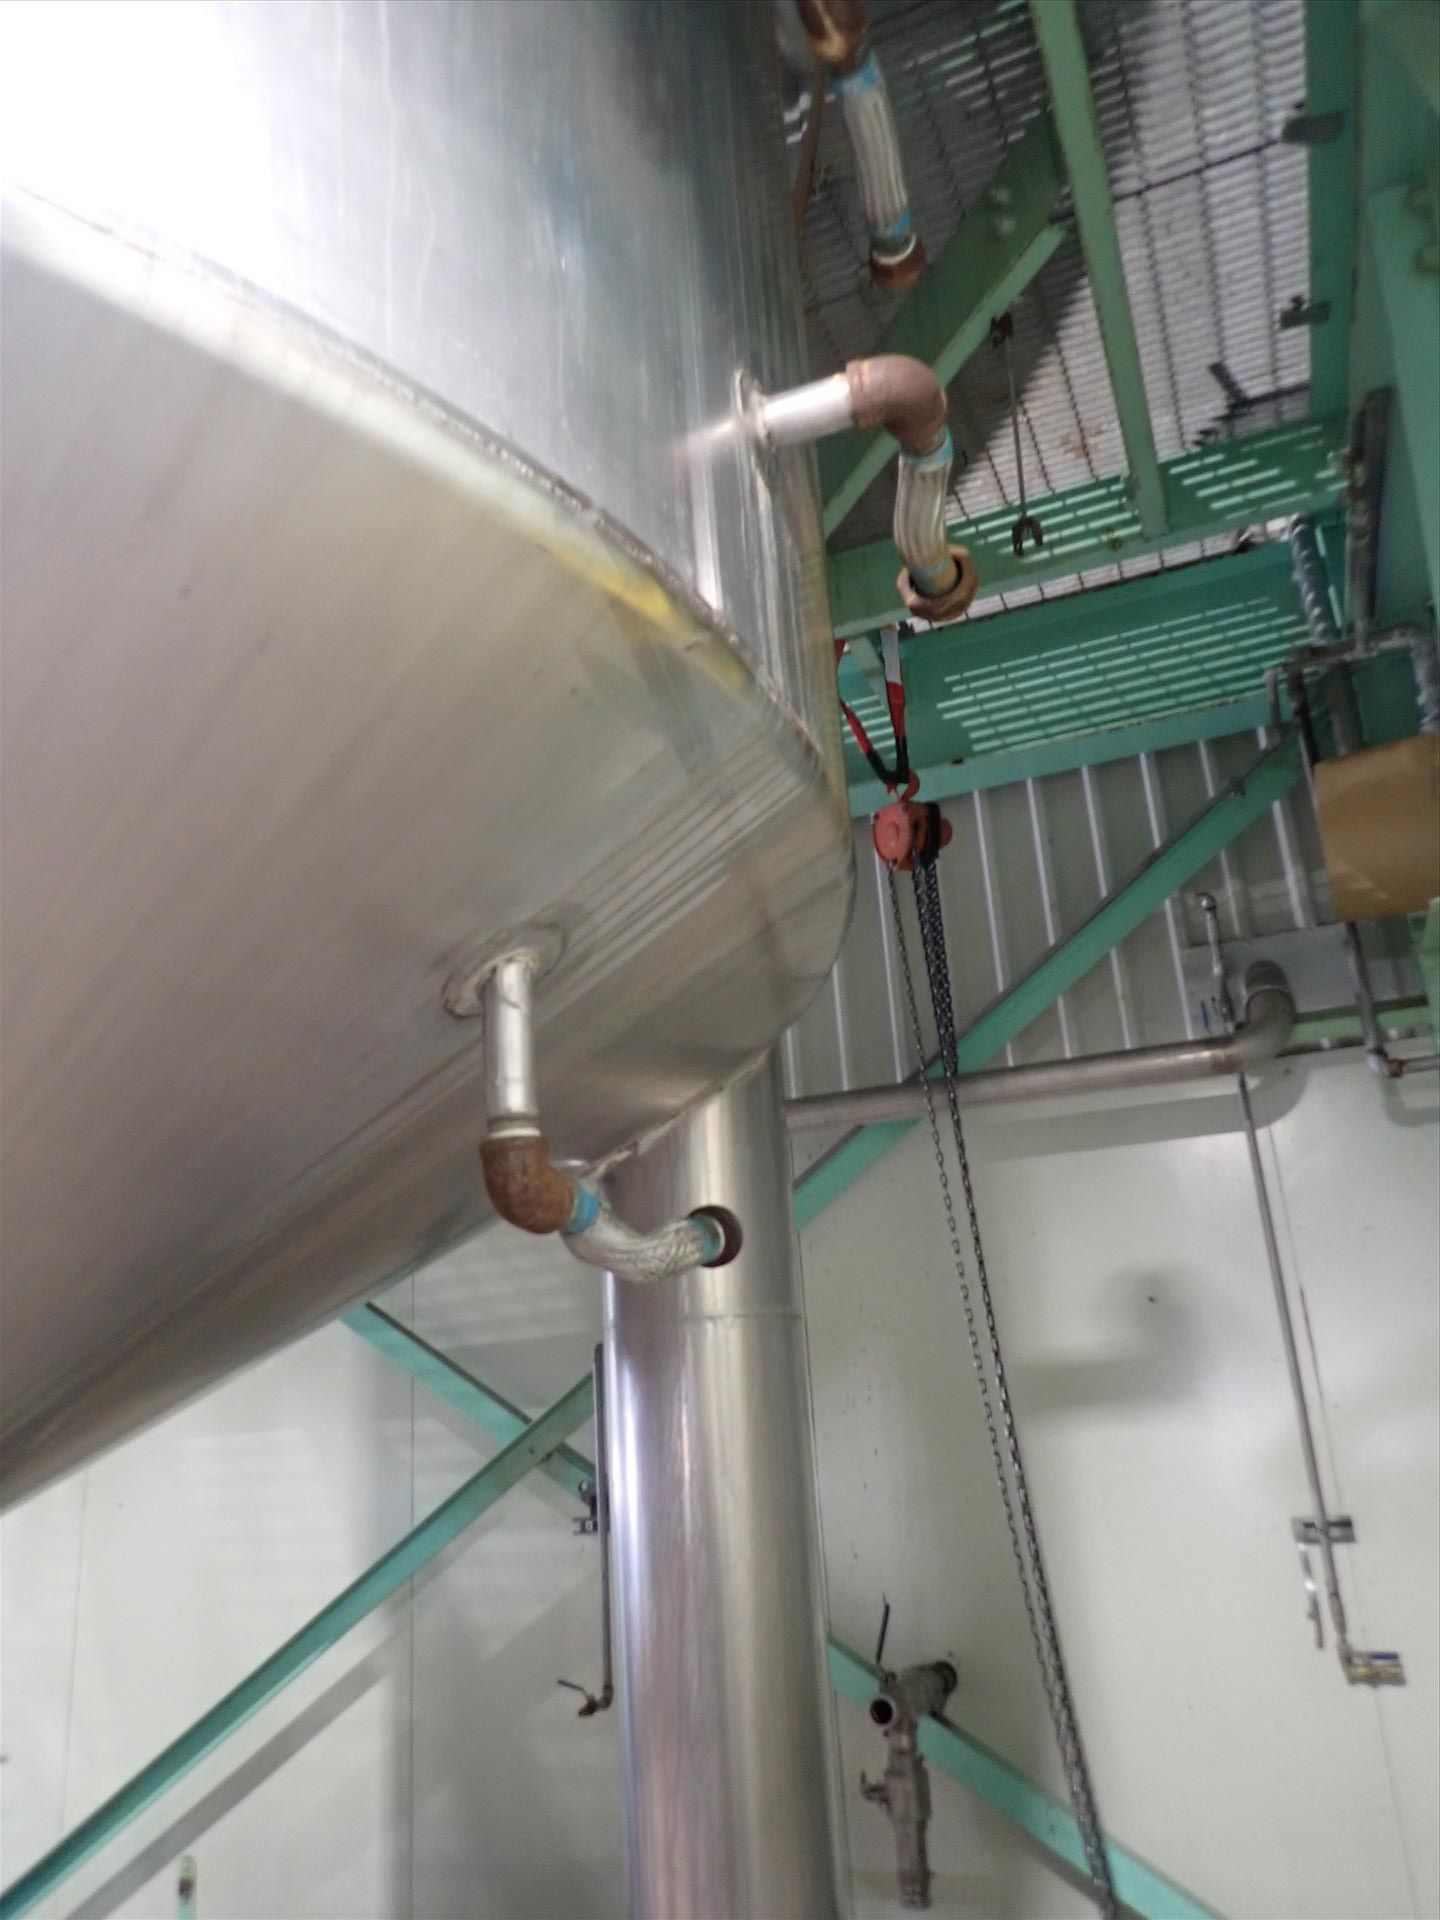 Inox-Tech Jacketed Tank 5400 gal., Stainless Steel, vertical. Internal rated 15 psi at 130 degrees - Image 9 of 11